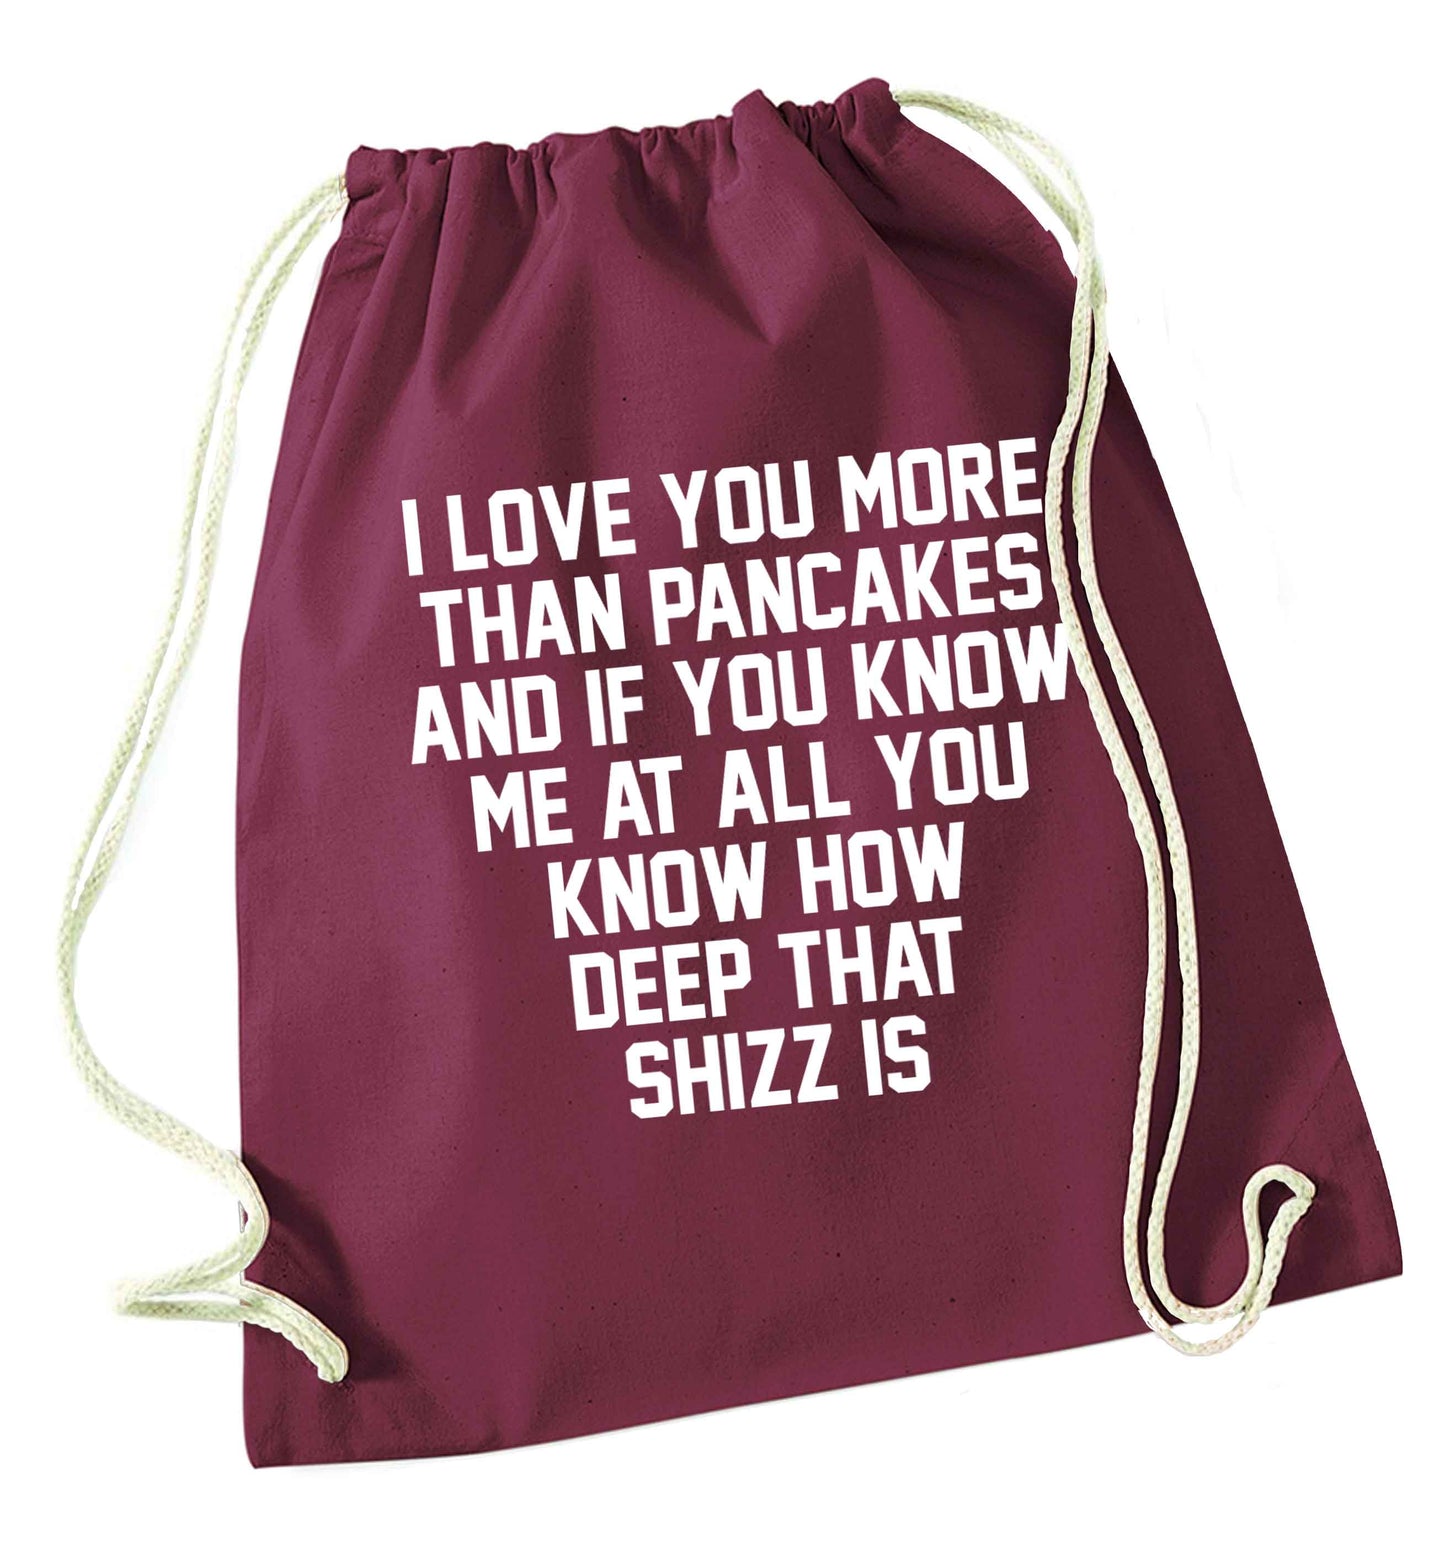 I love you more than pancakes and if you know me at all you know how deep that shizz is maroon drawstring bag